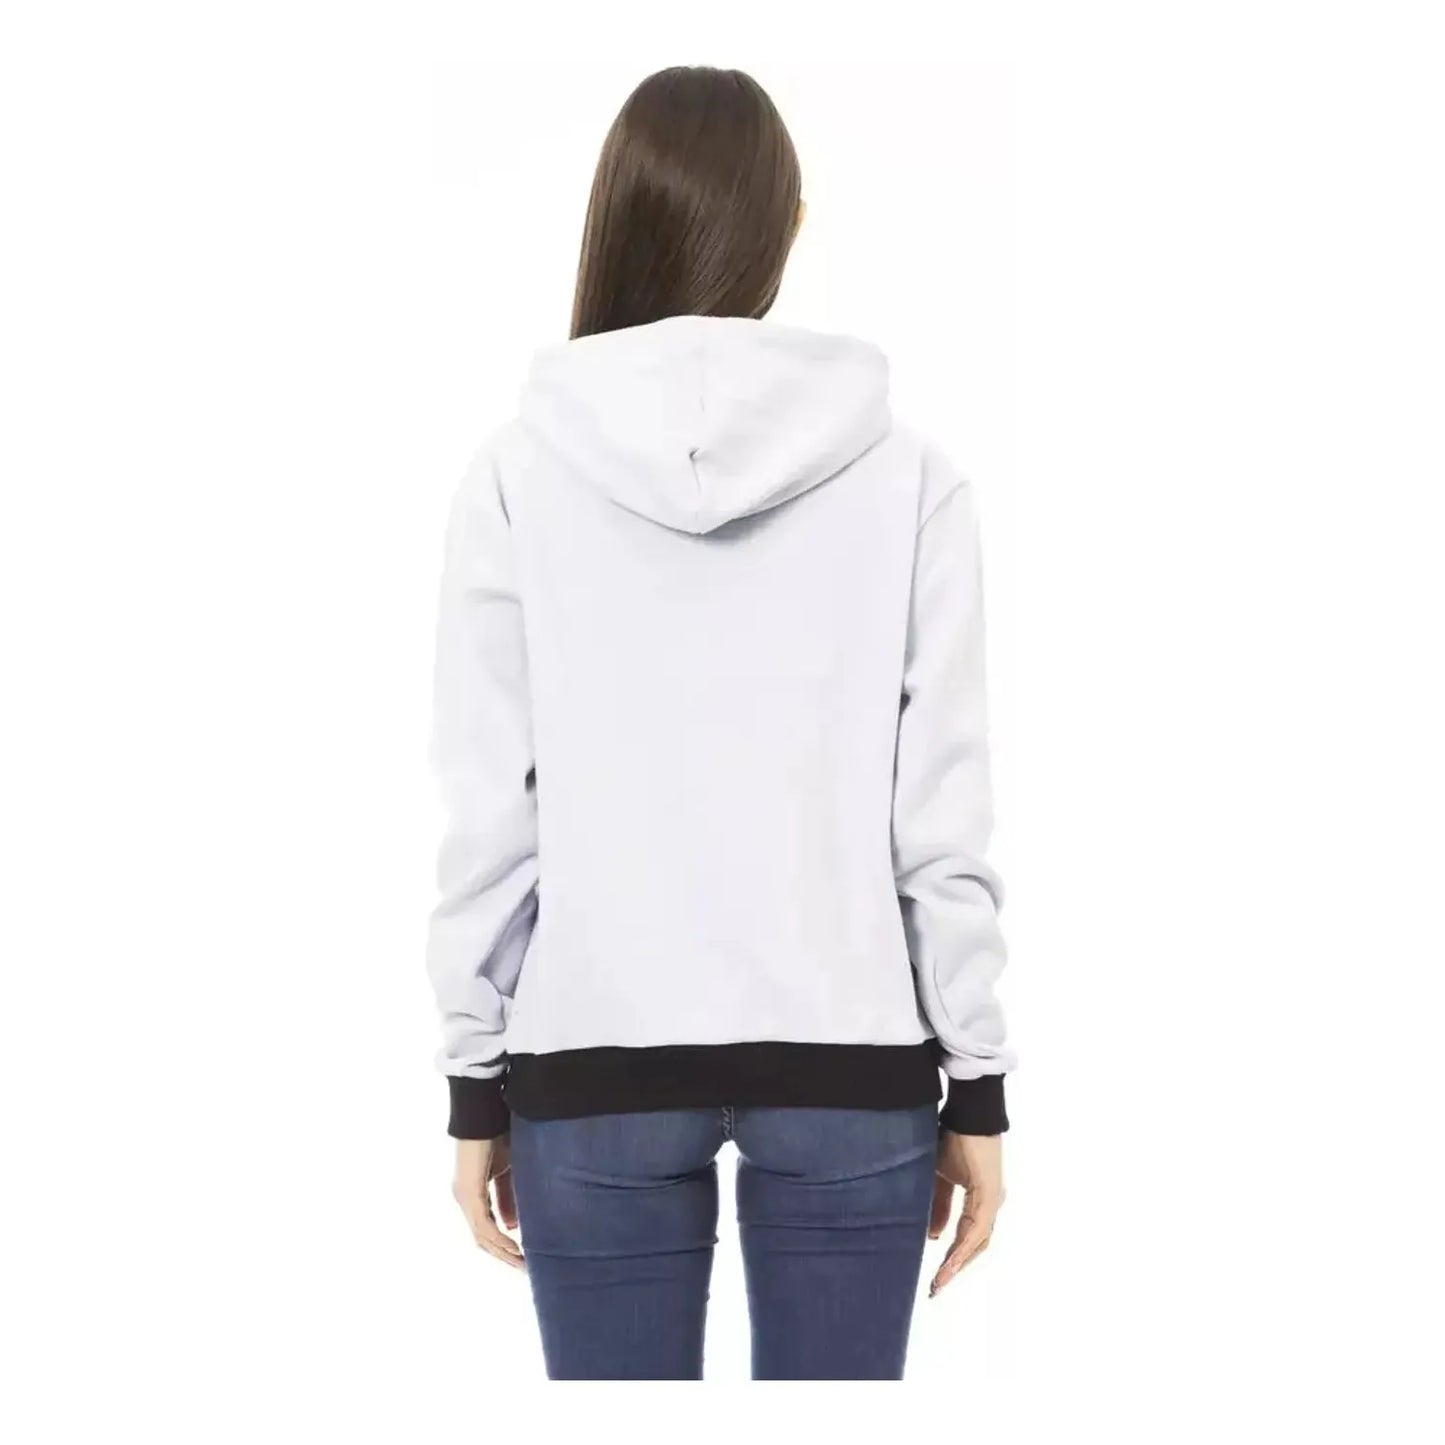 Baldinini Trend Chic White Cotton Fleece Hoodie with Front Logo white-cotton-sweater-11 product-22526-1752650677-20-0d3dac4d-1af.webp